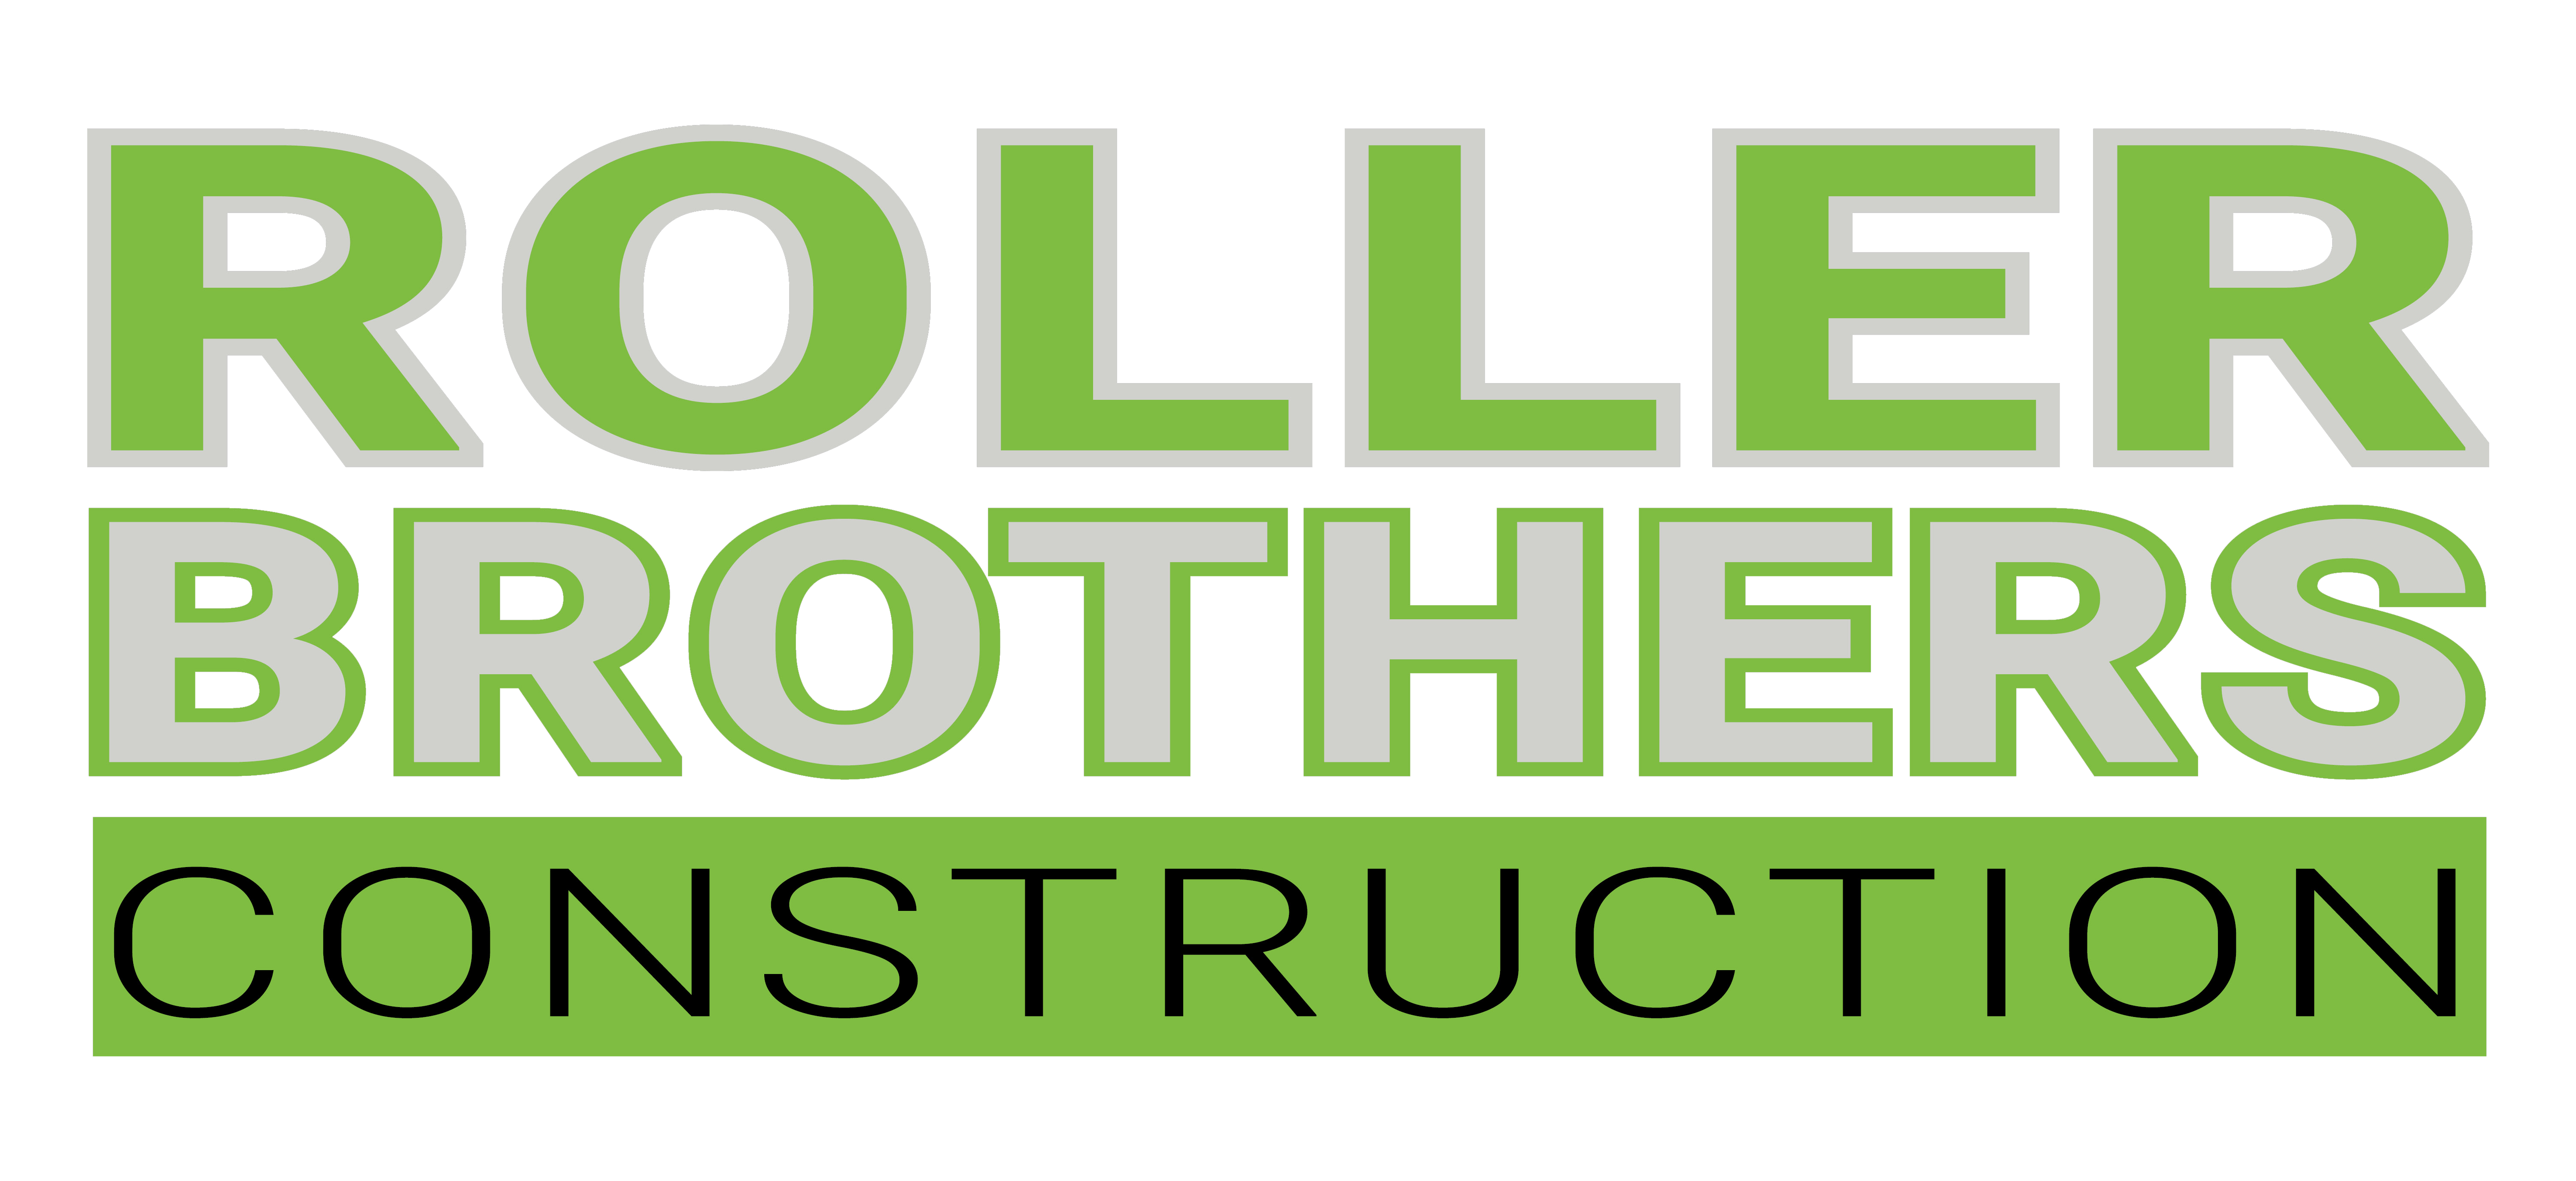 roller-brothers-construction-logo